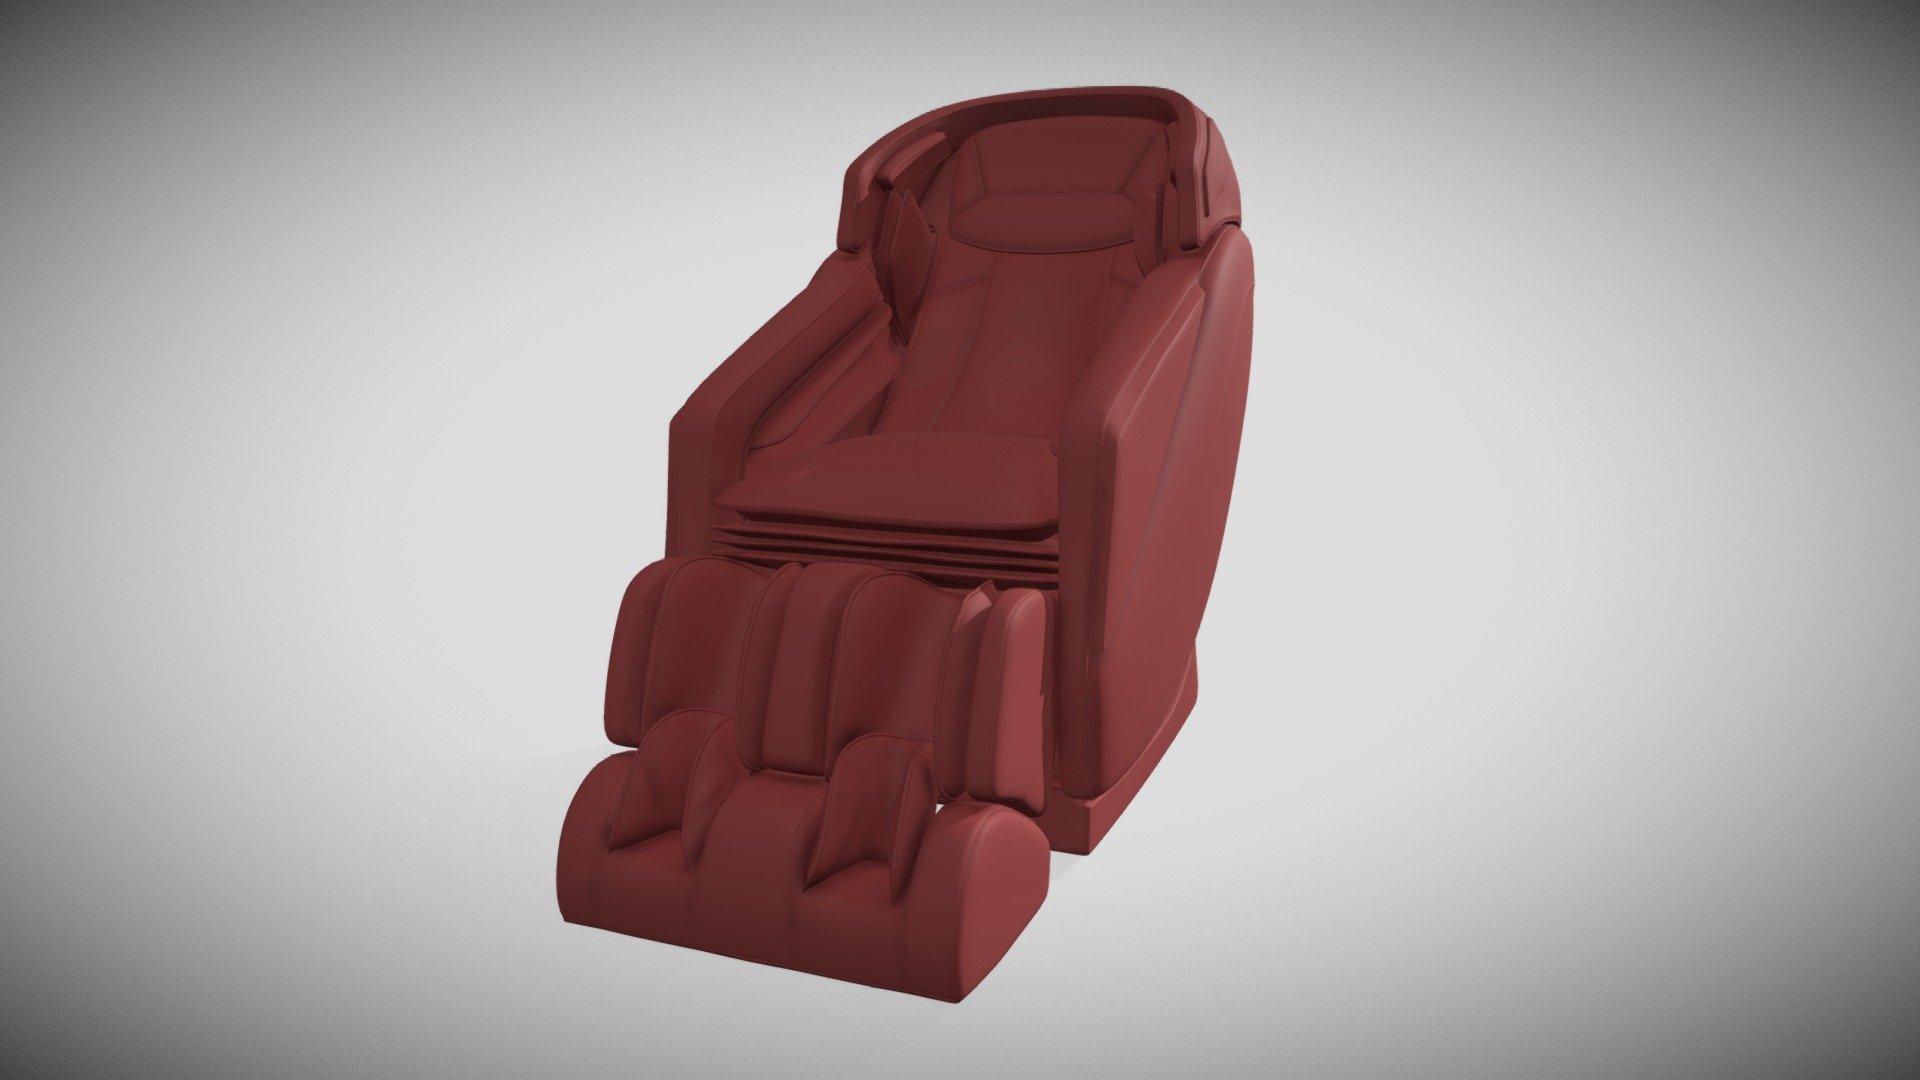 3d model Pamper yourself with relaxing head to toe massage in the comfort. uv mapped ready to texture 0.1 u.v set 1 - Massager Chair - 3D model by Creative Junction (@yashart29) 3d model